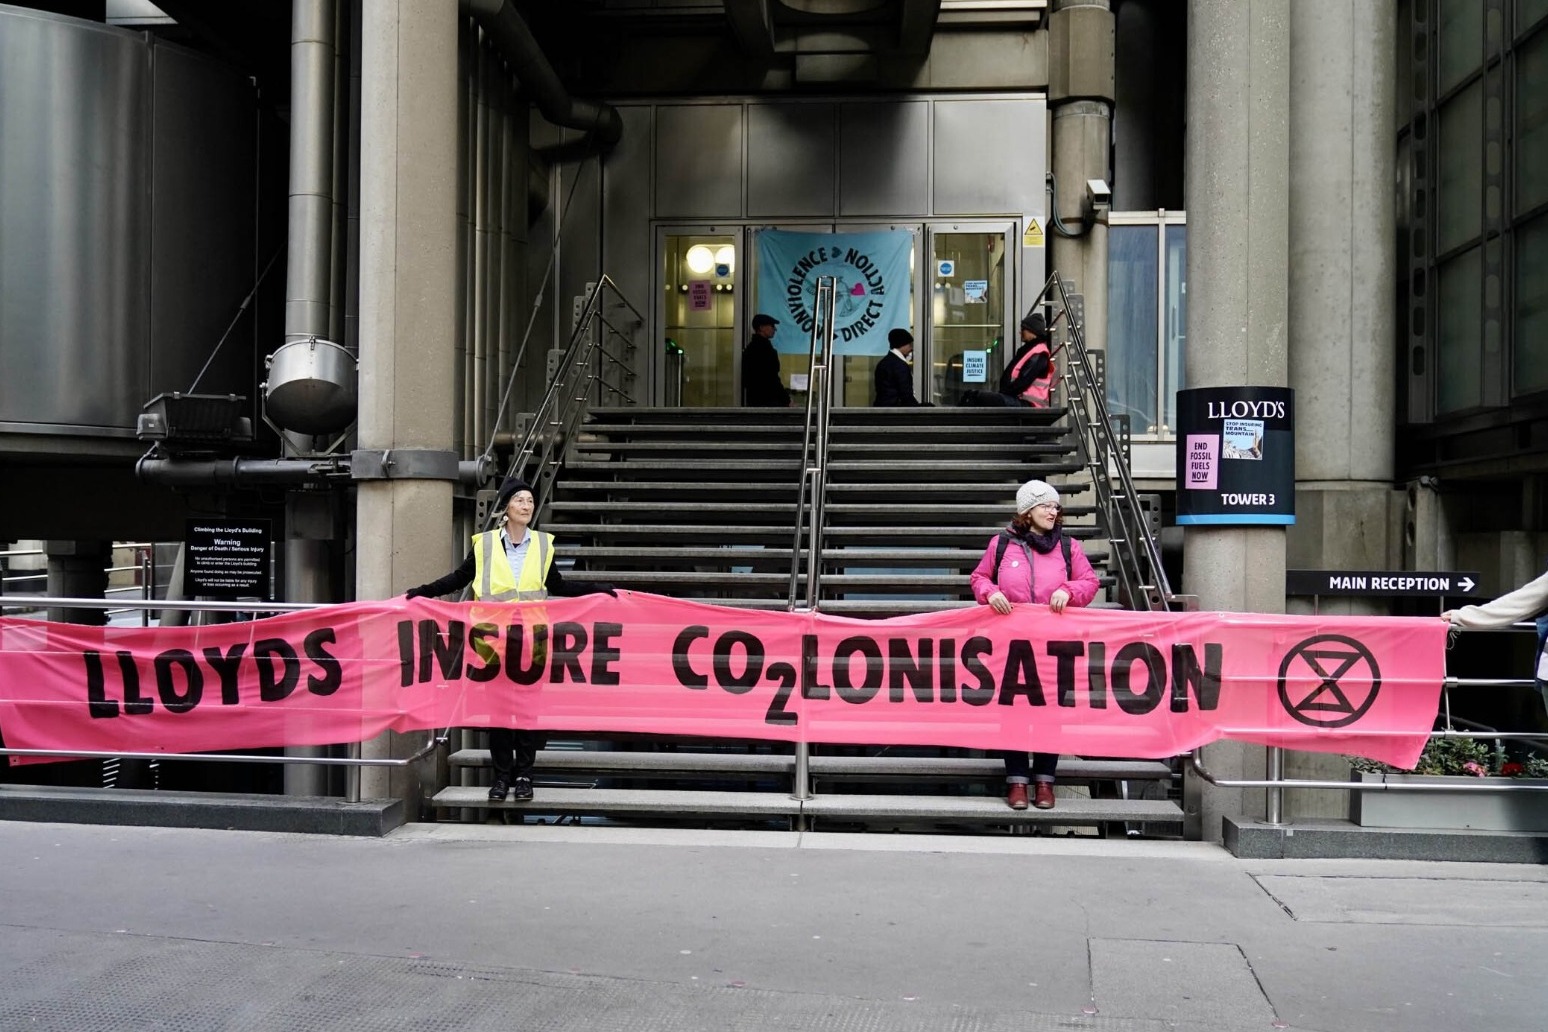 Climate activists aim to shut Lloyd’s of London for the day in fossil fuels protest 